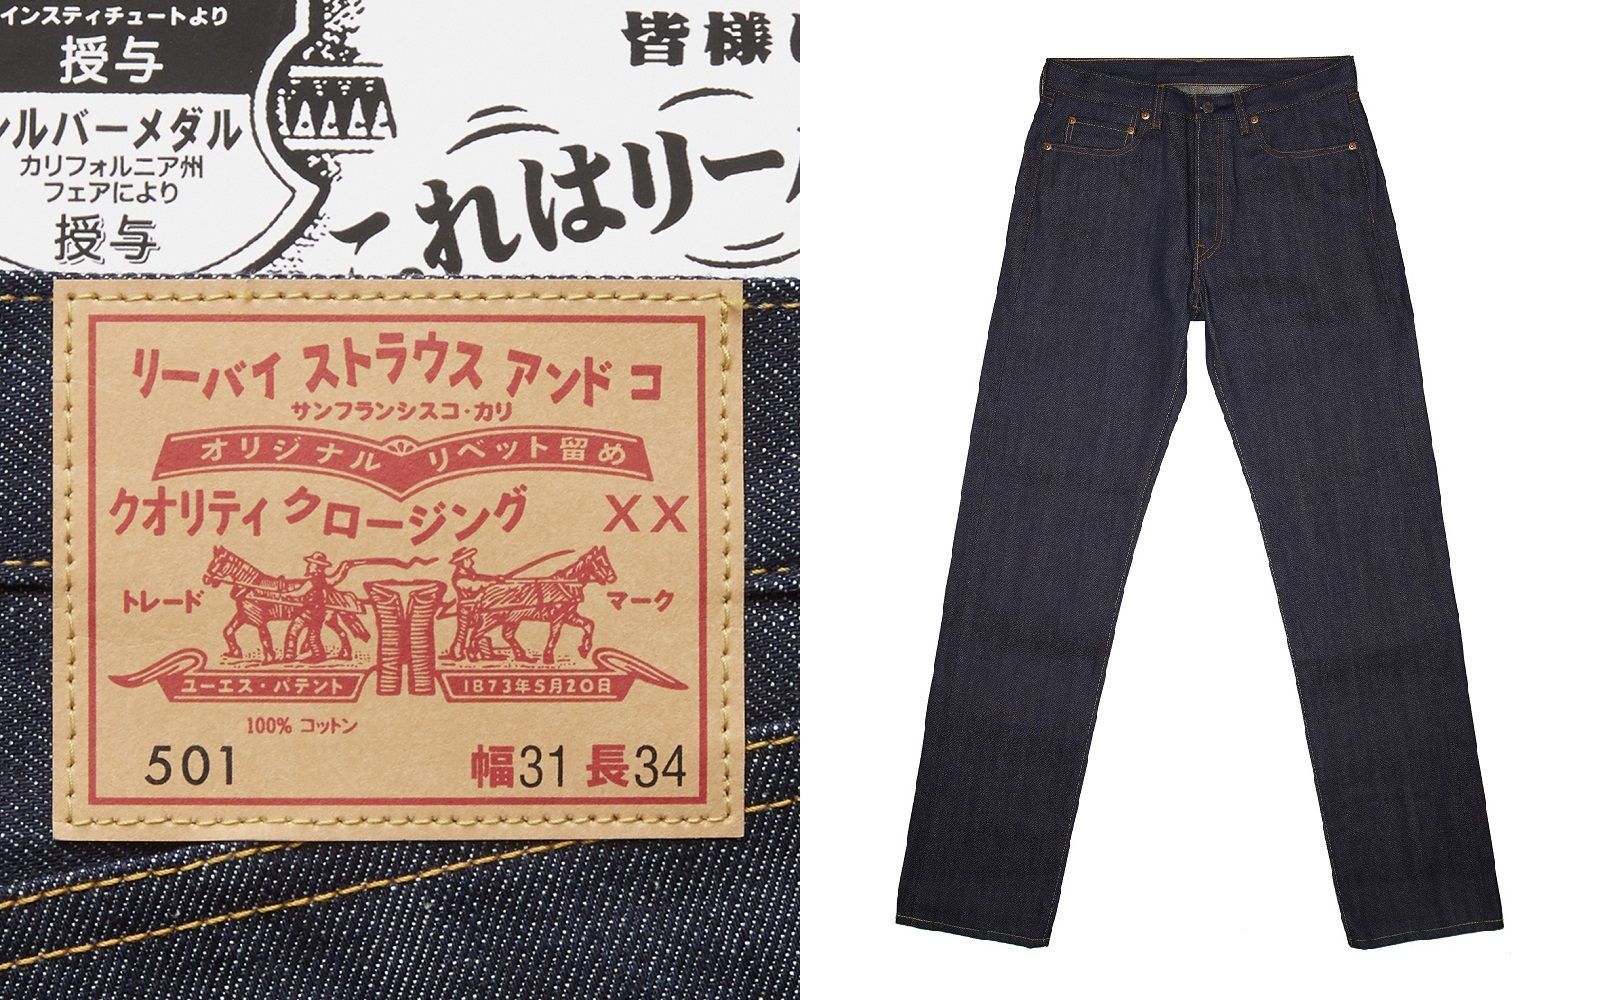 levi's 501 limited edition